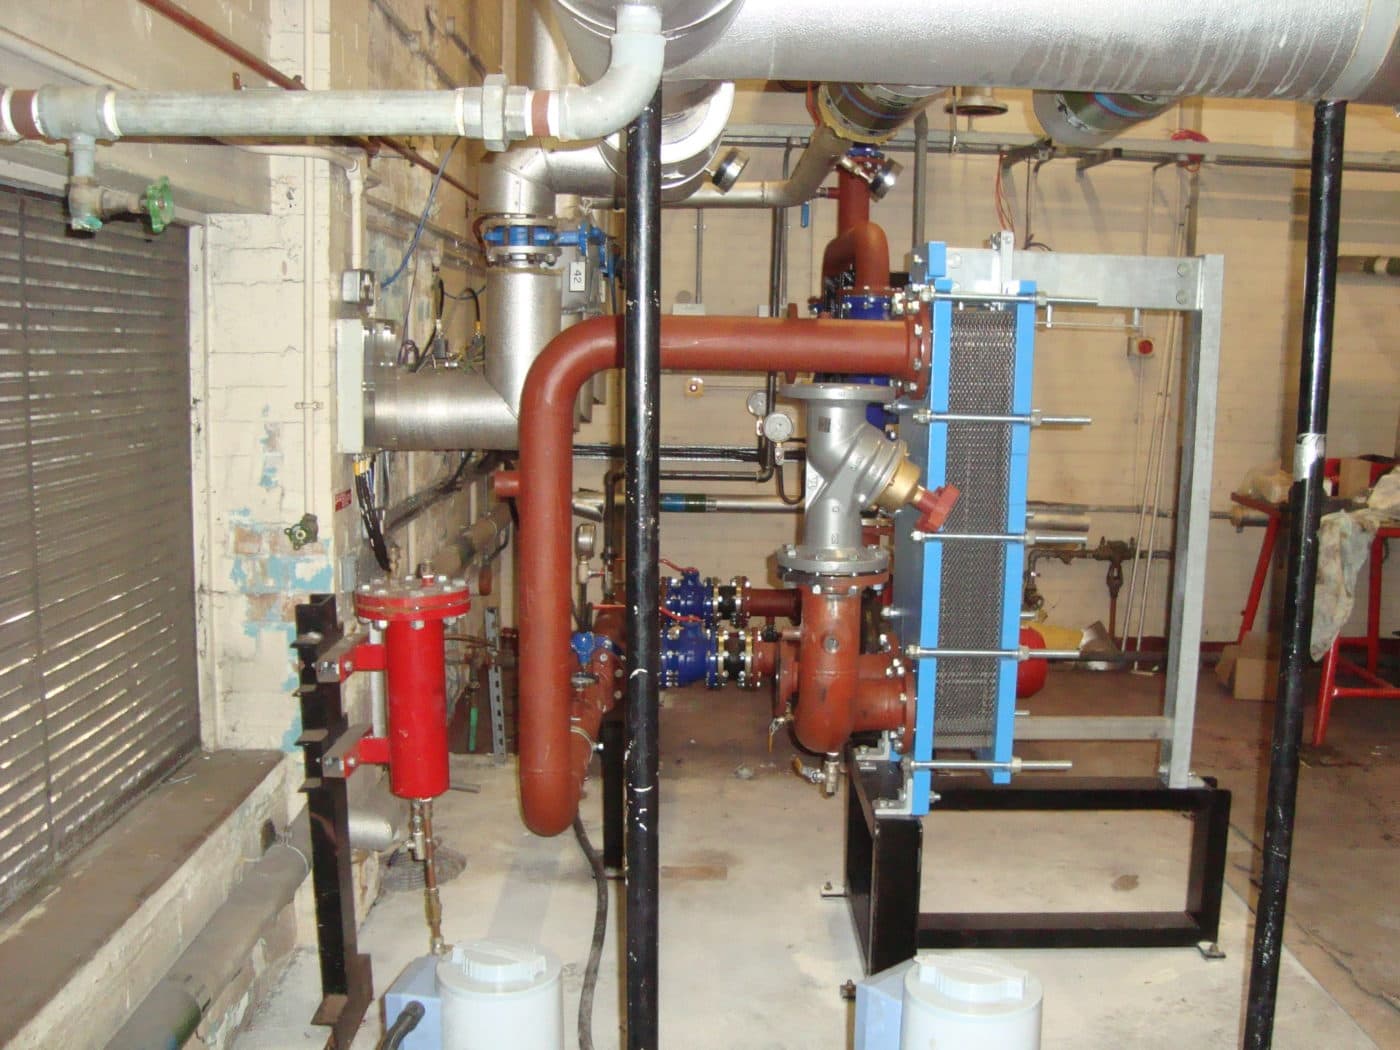 Heating Distribution Plant Room inc. Plate Heat Exchanger Back view- Hot Water - Government Facility